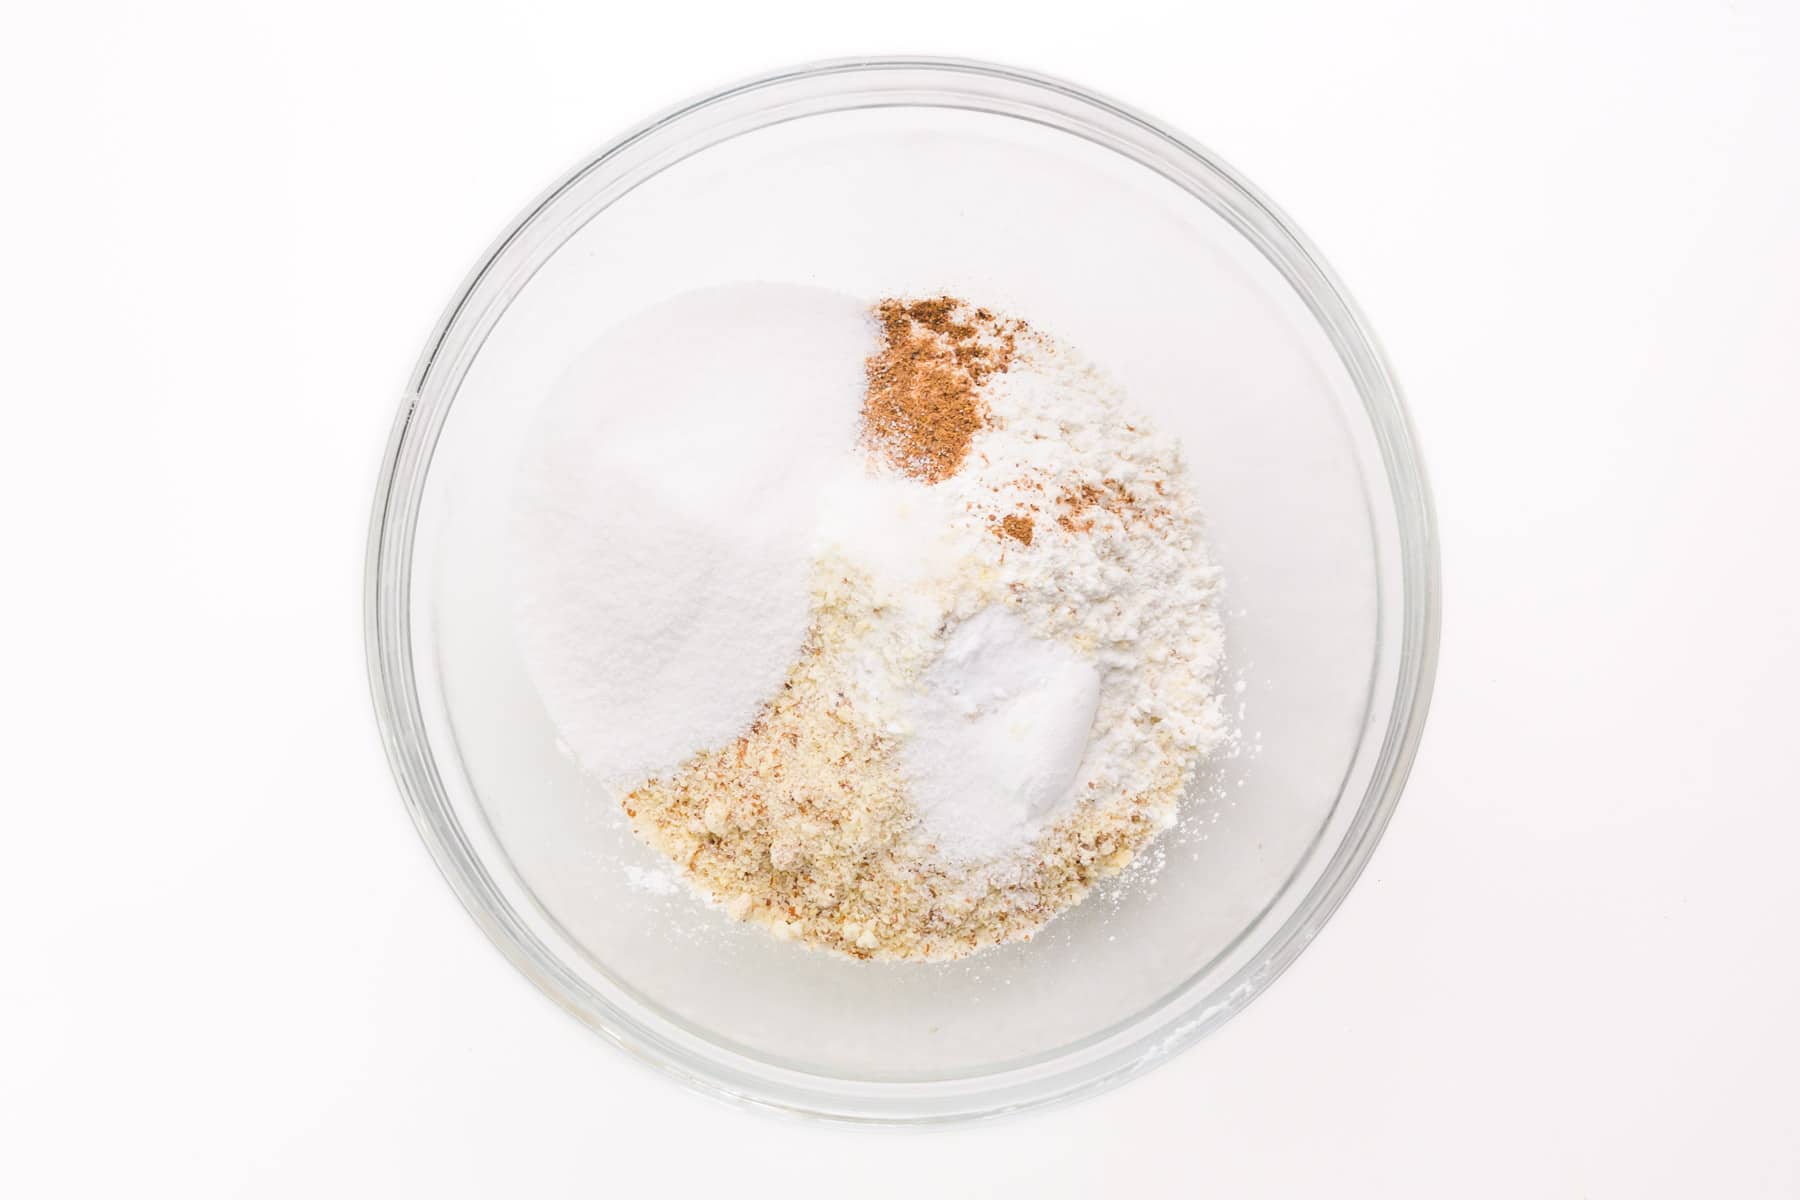 The dry ingredients for making the donuts are at the bottom of a bowl.